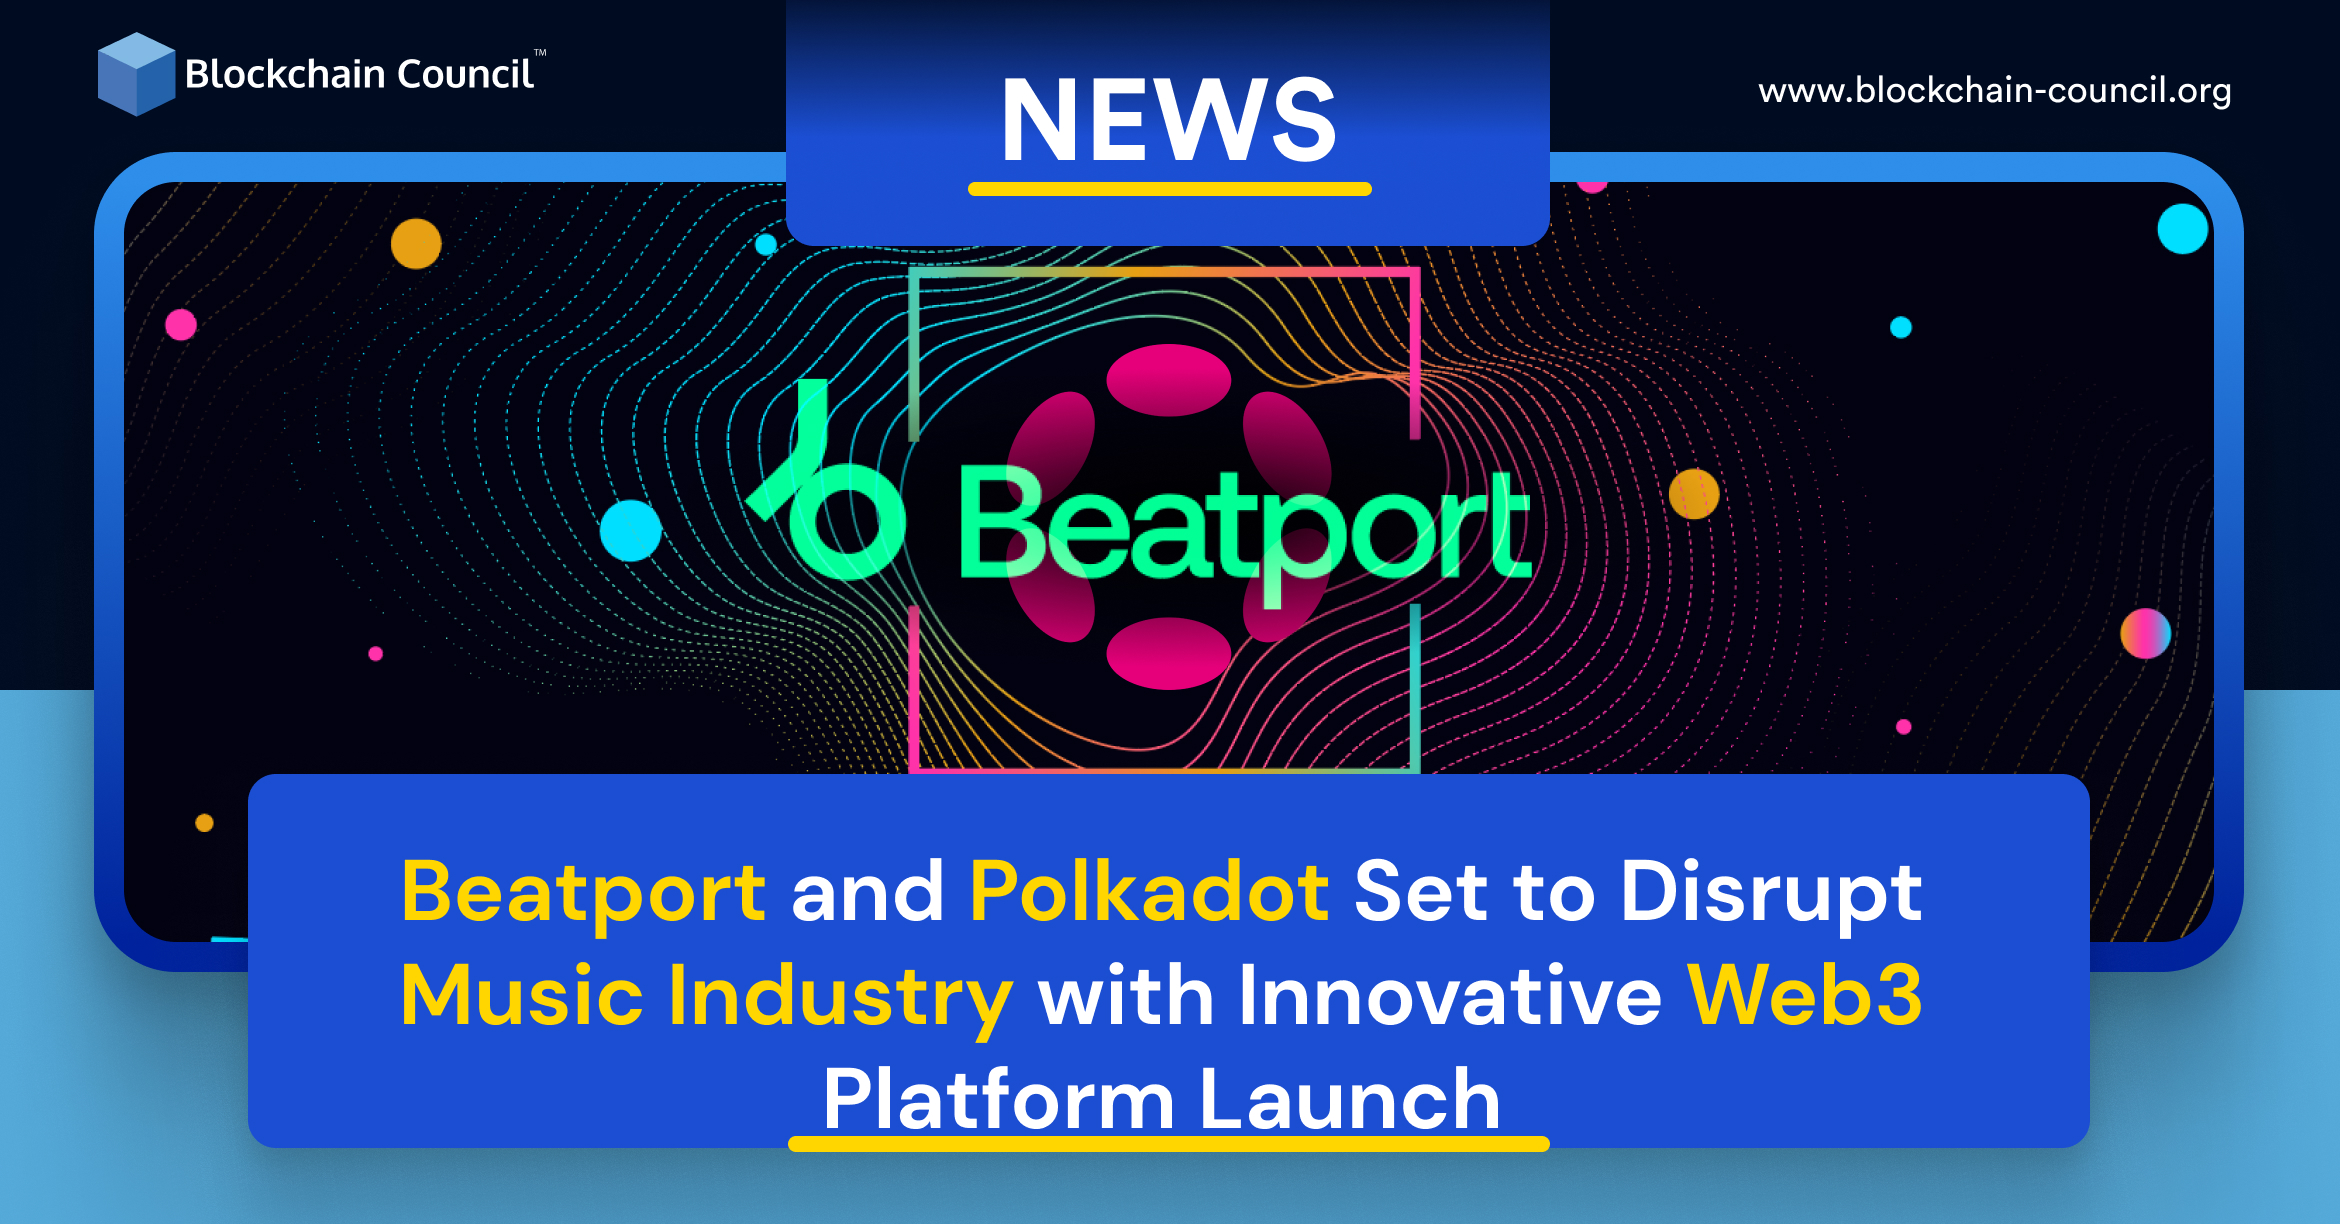 Beatport and Polkadot Set to Disrupt Music Industry with Innovative Web3 Platform Launch